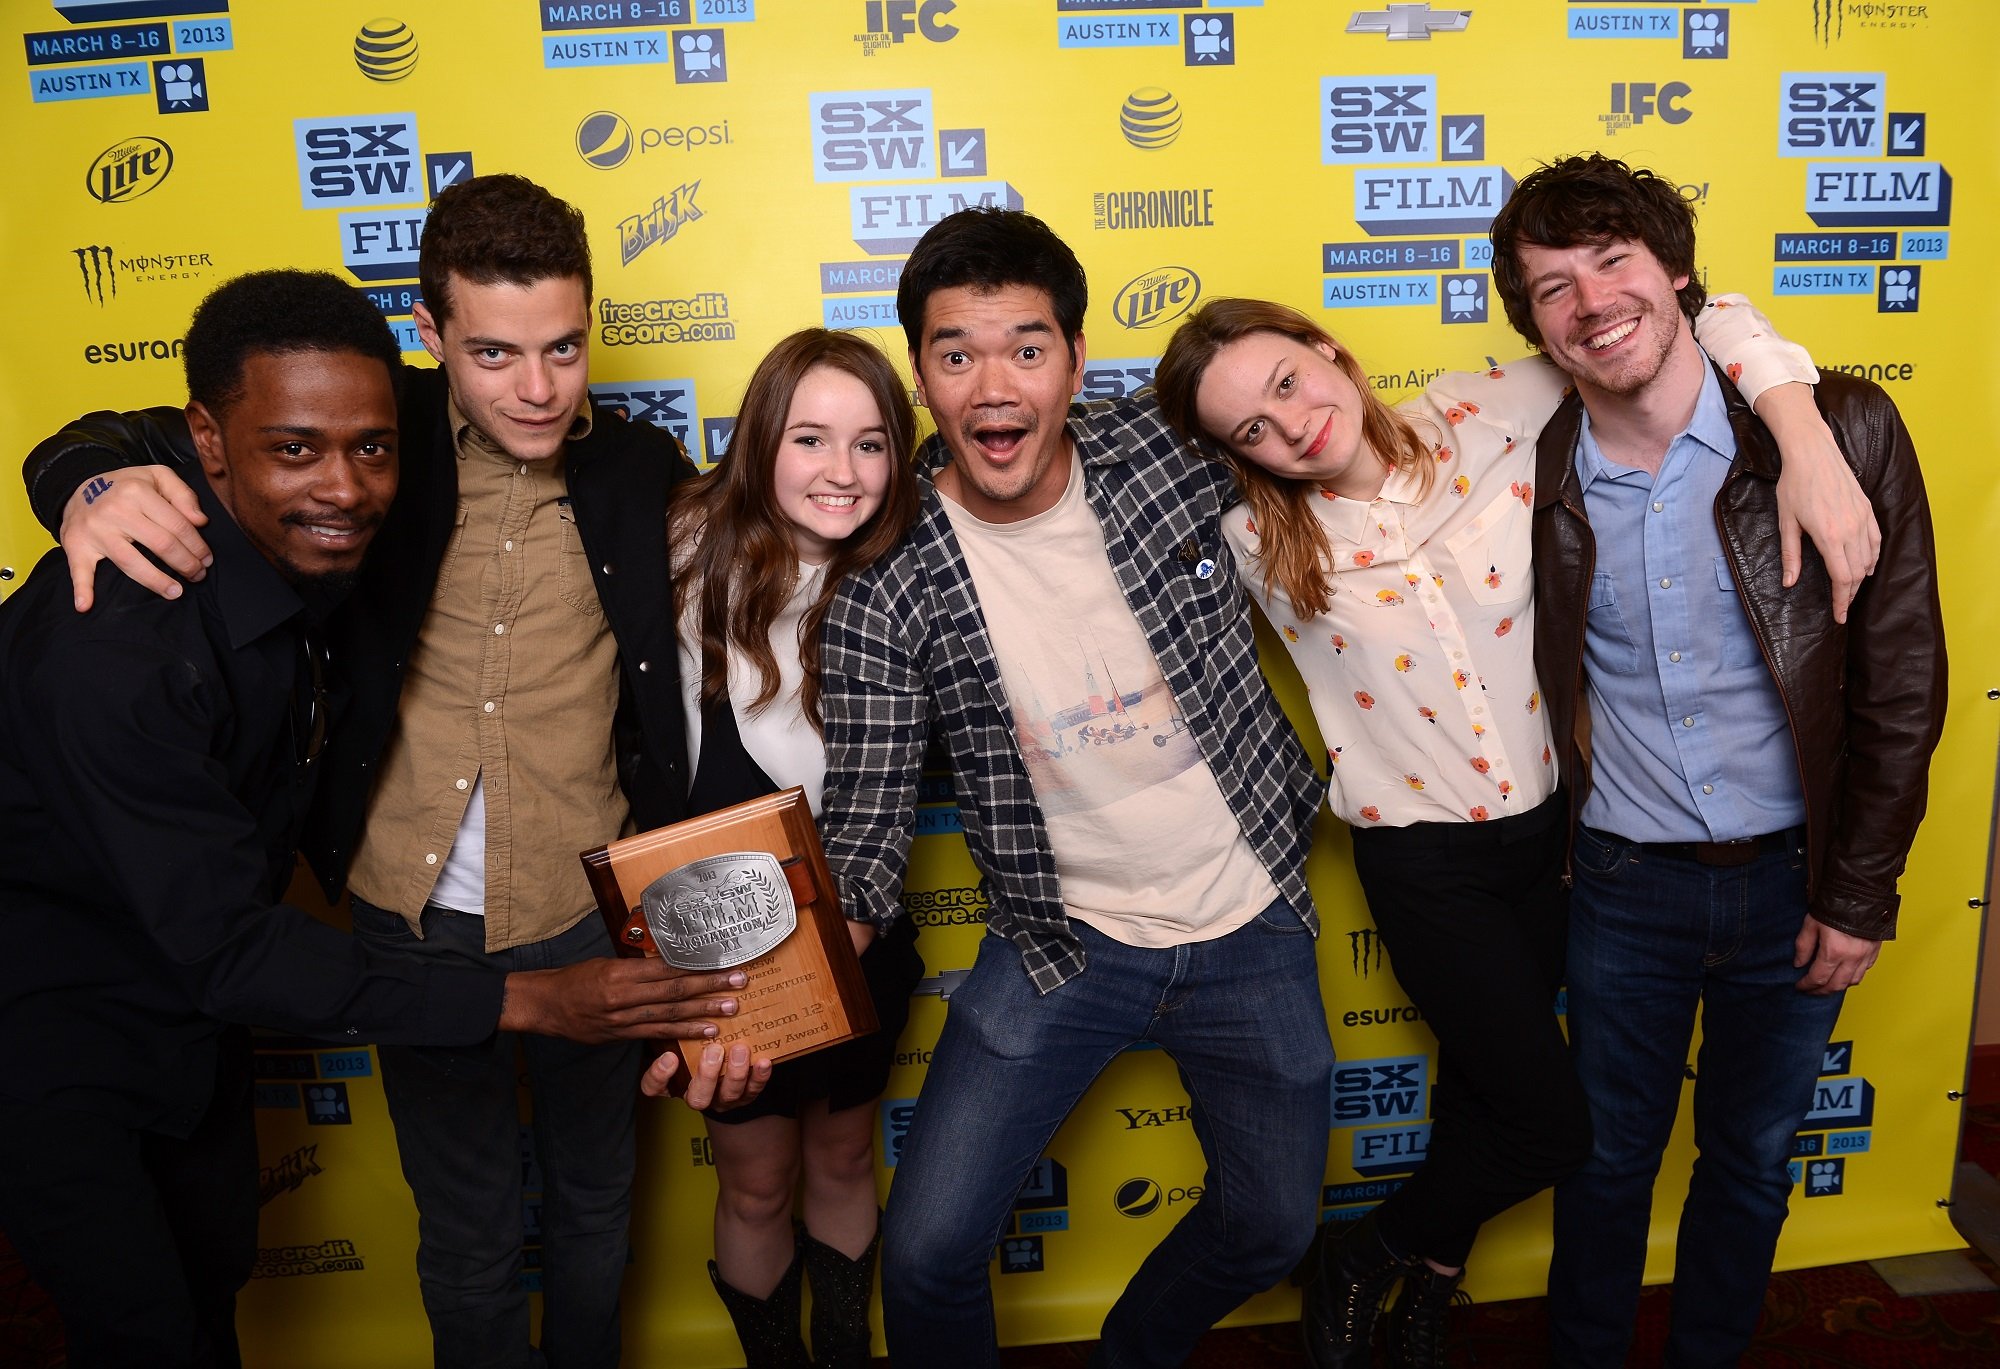 (L-R) Keith Stanfield, Rami Malek, Kaitlyn Dever, Destin Cretton, actress Brie Larson and John Gallagher Jr. of 'Short Term 12' at the 2013 SXSW Film Awards on March 12, 2013